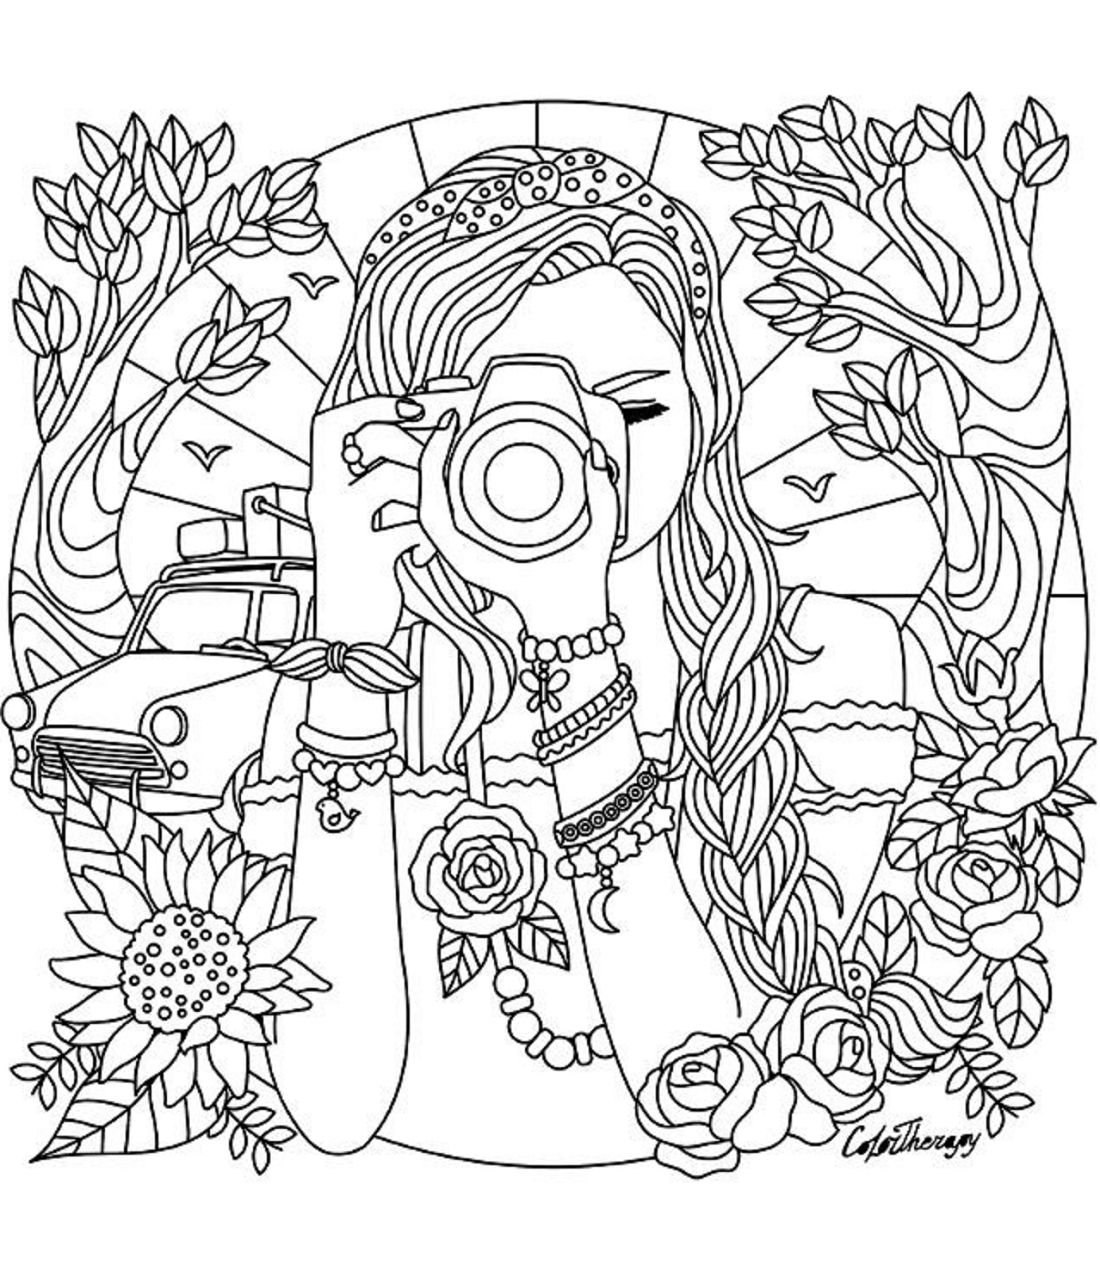 Girl Is Taking Photos Coloring Page   Free Printable Coloring ...